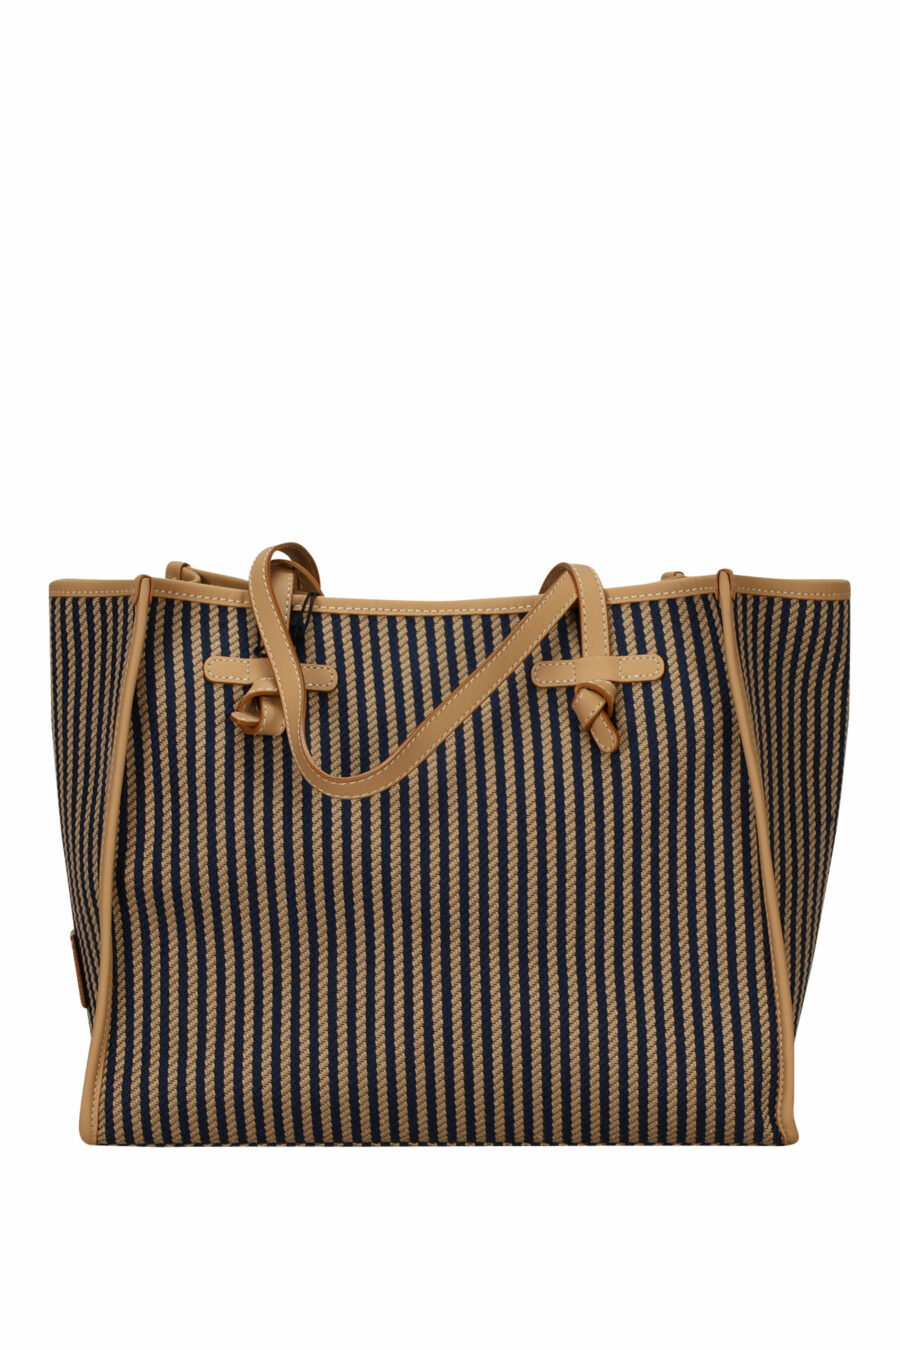 Shopper bag "Marcella" brown with dark blue lines and minilogo - 8057145894331 2